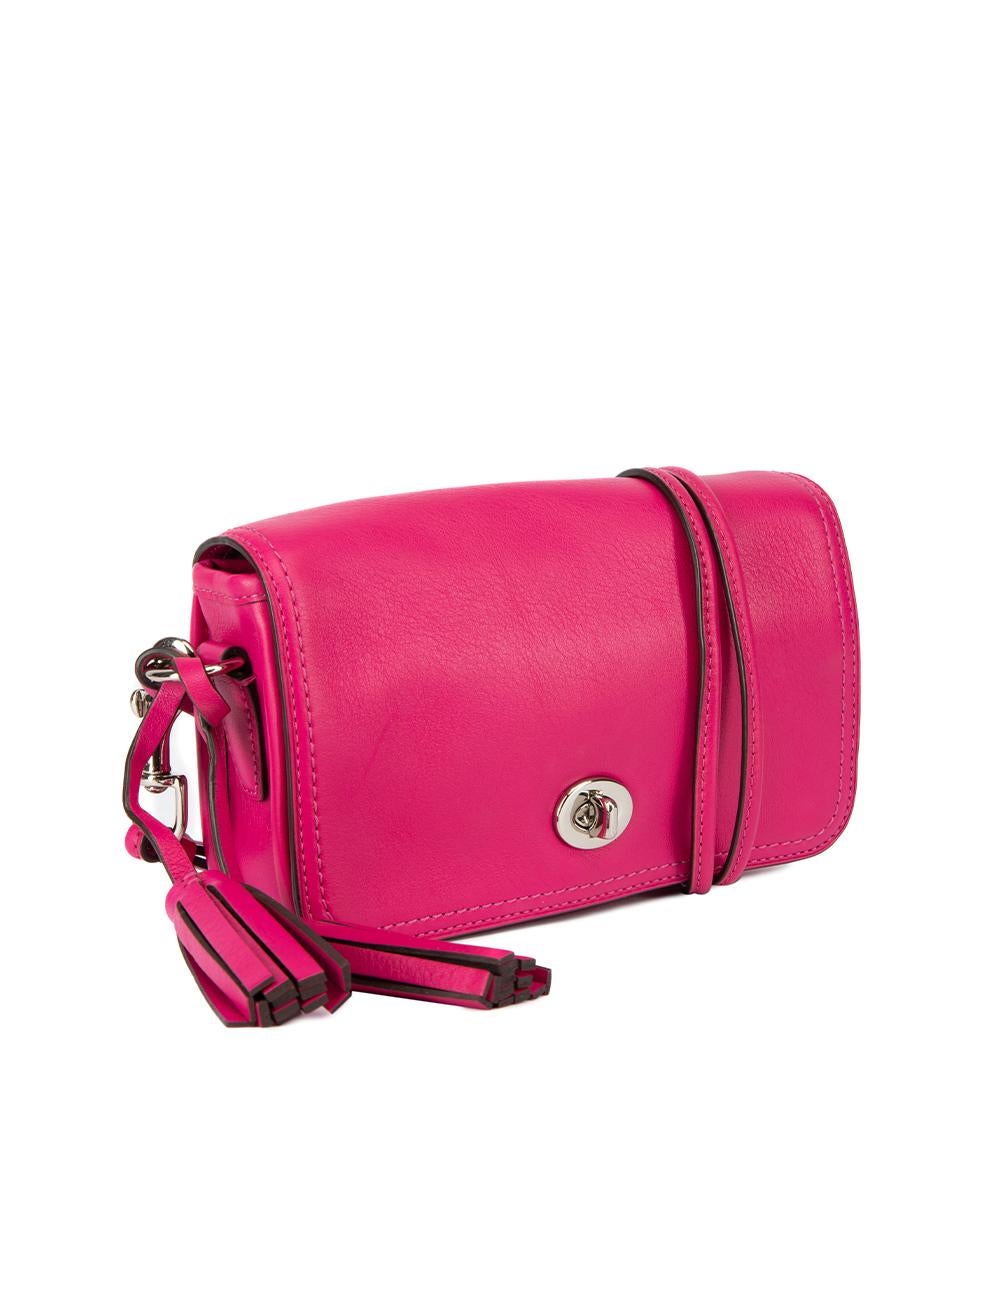 Coach Pink Crossbody Purse - For Sale on 1stDibs